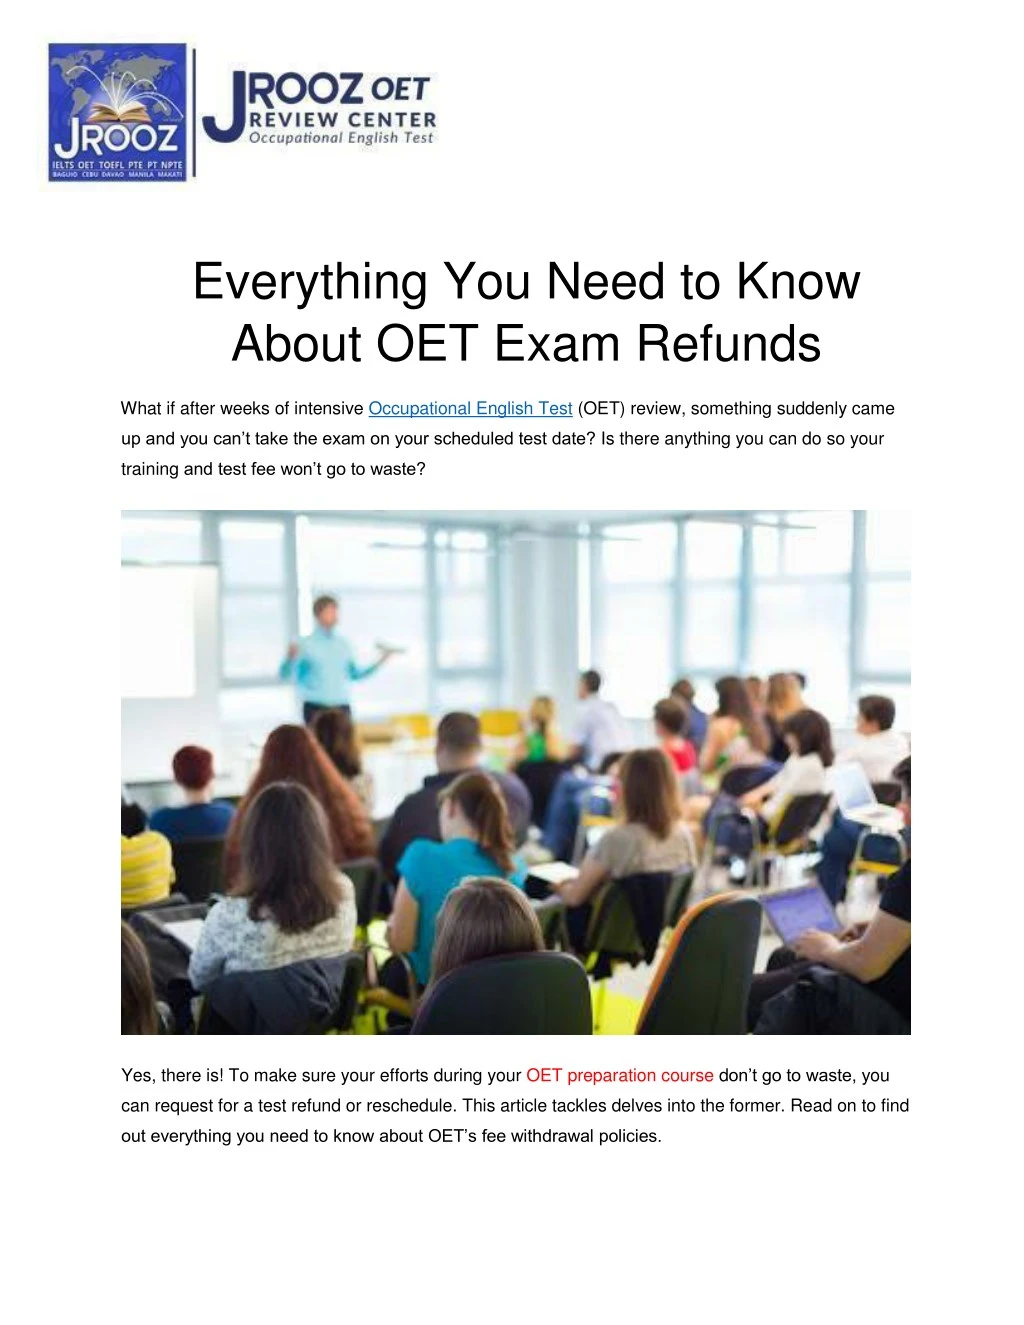 everything you need to know about oet exam